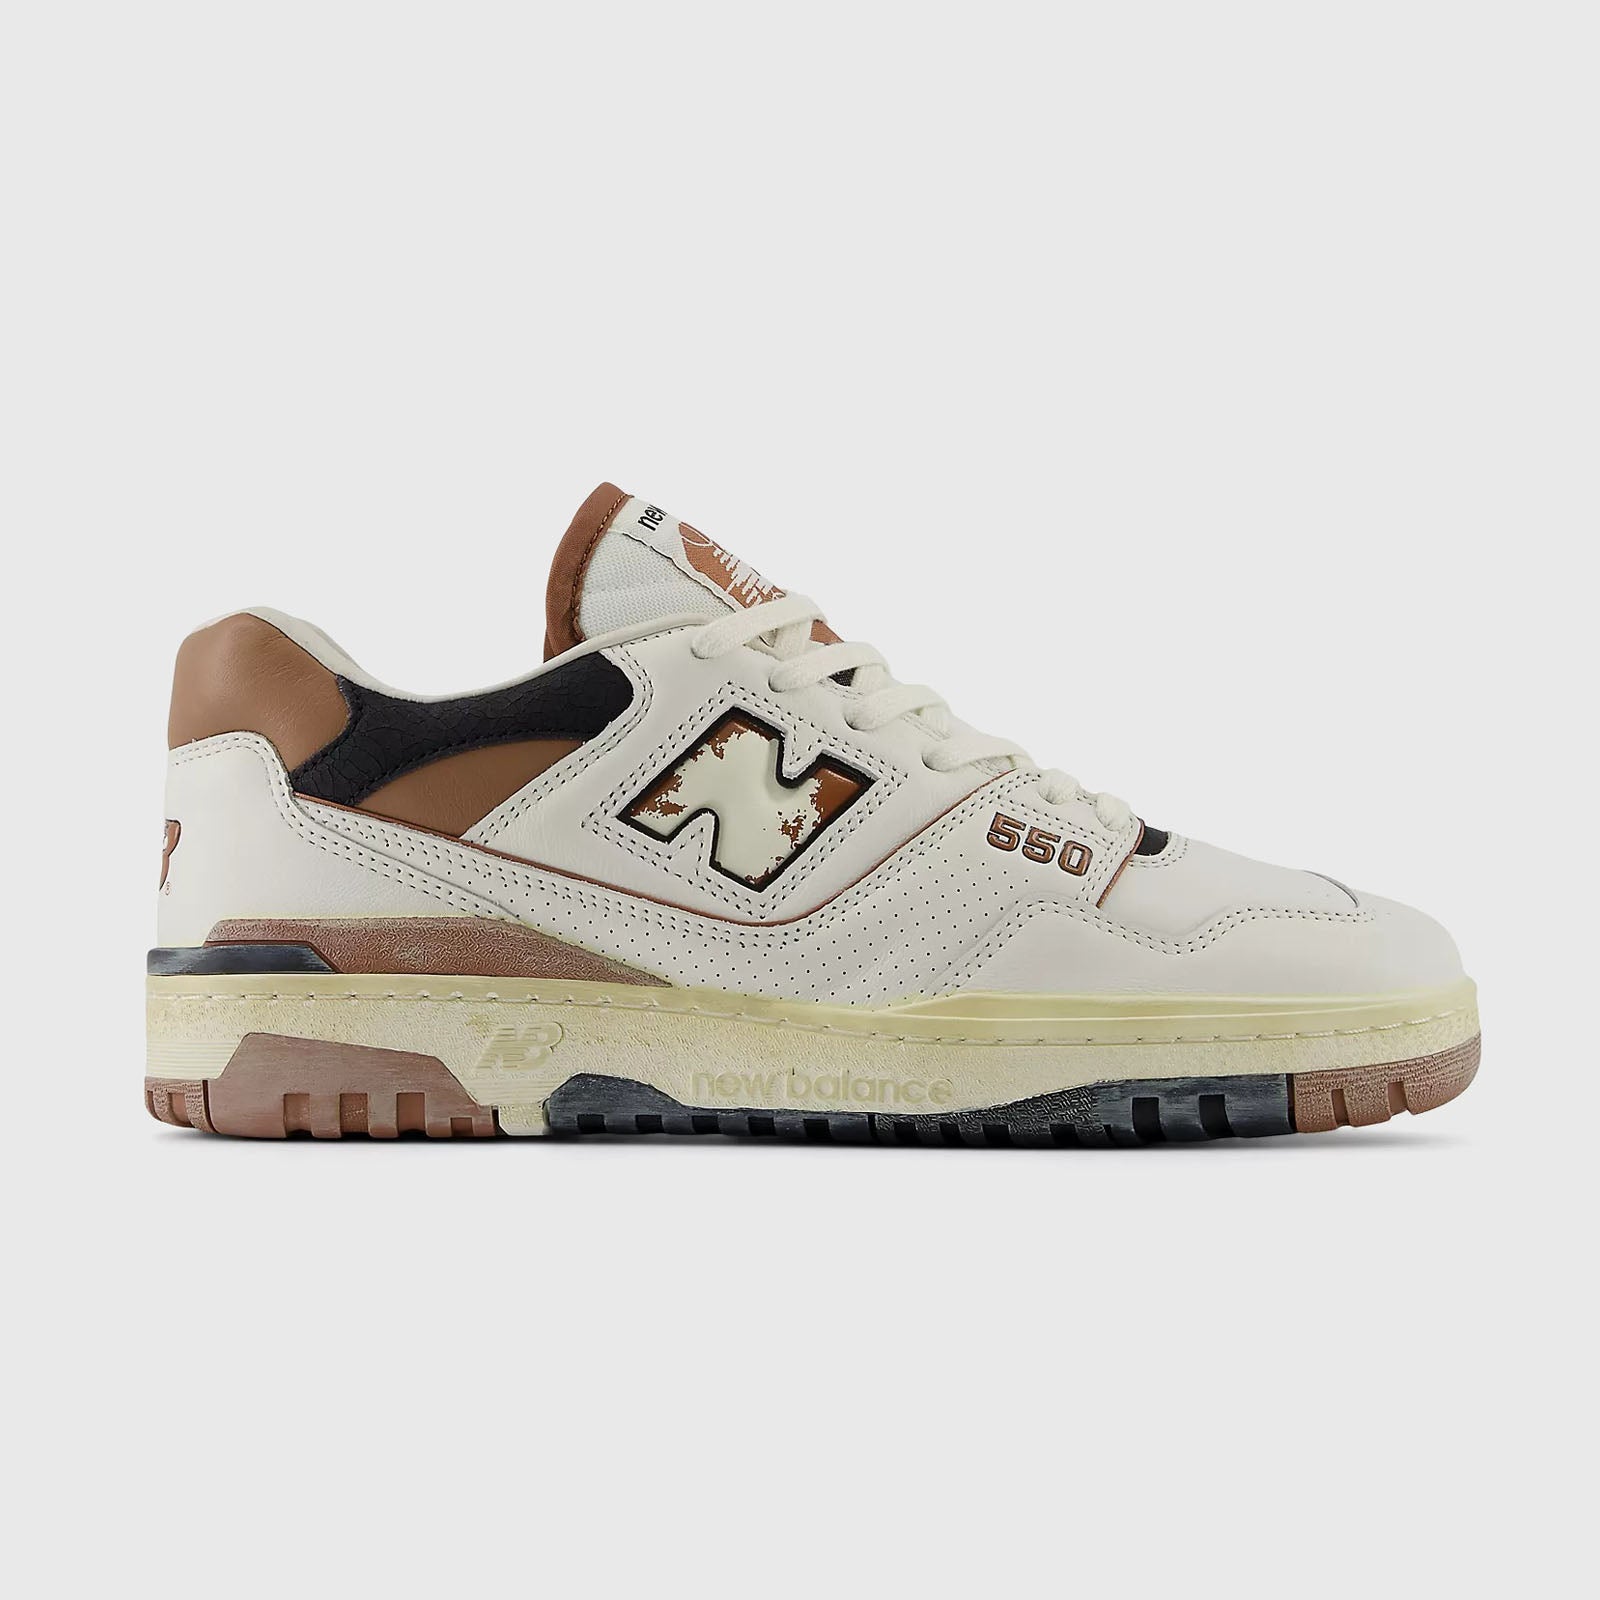 New Balance 550 Brown Synthetic Sneaker - 7